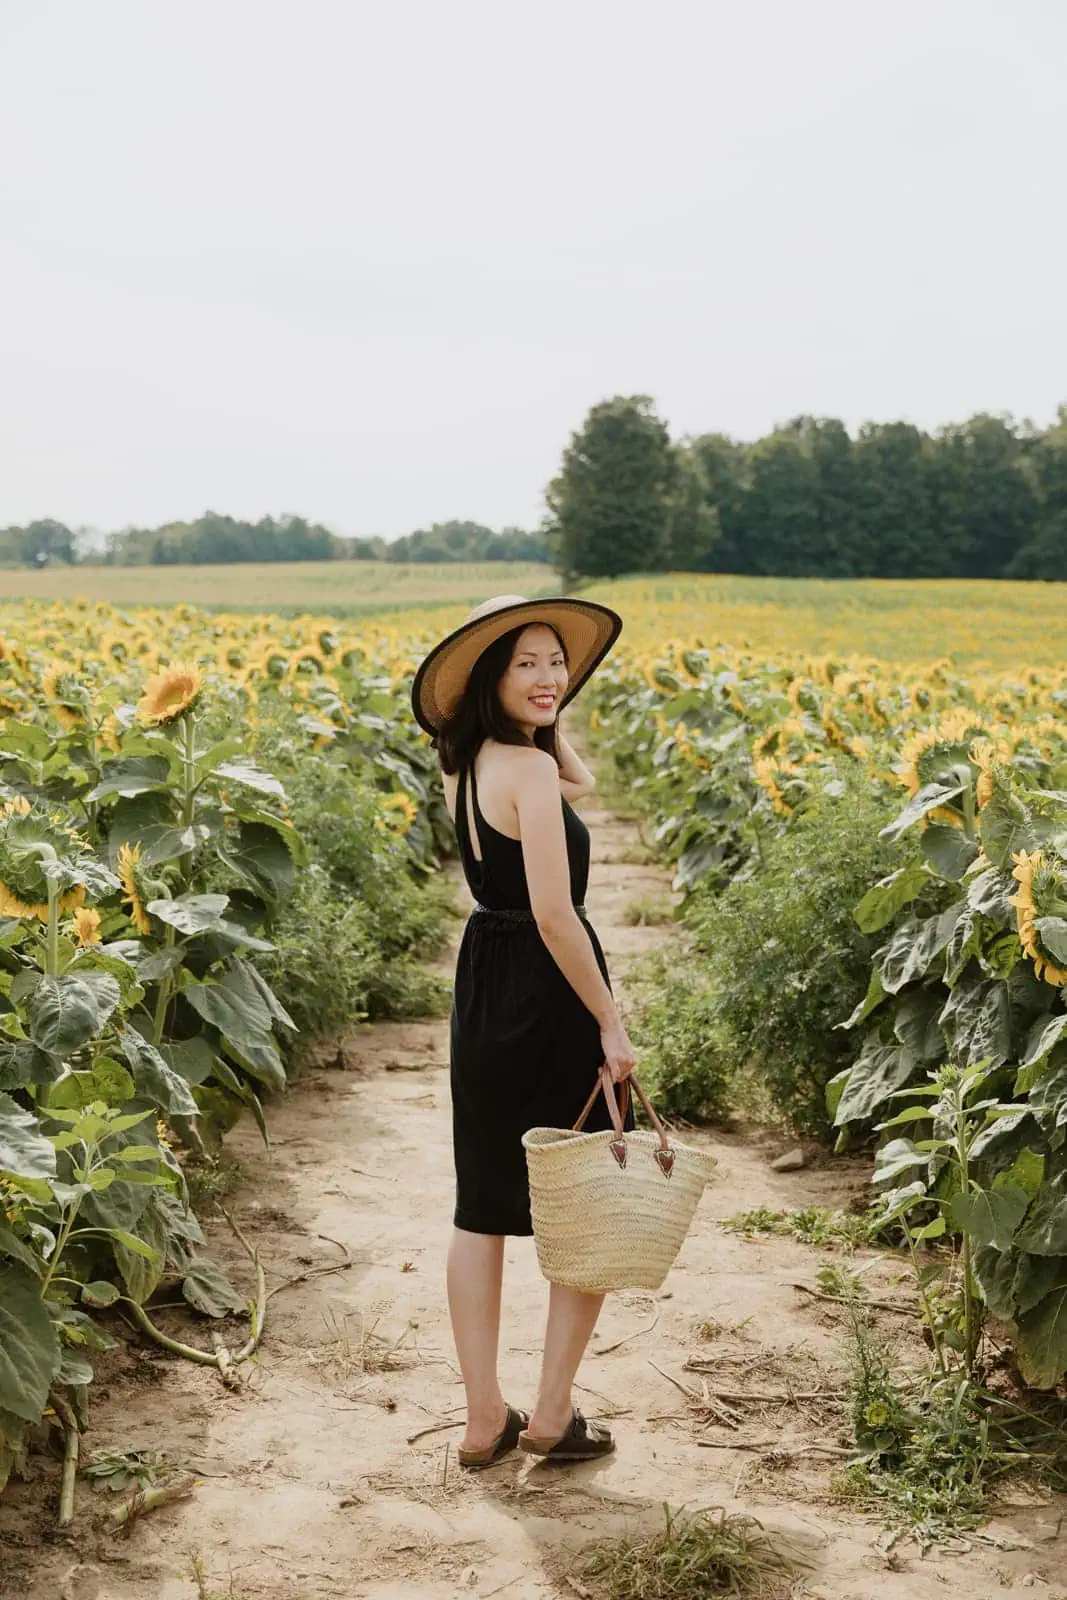 A woman in a black dress and wide brimmed hat walking through a field of sunflowers